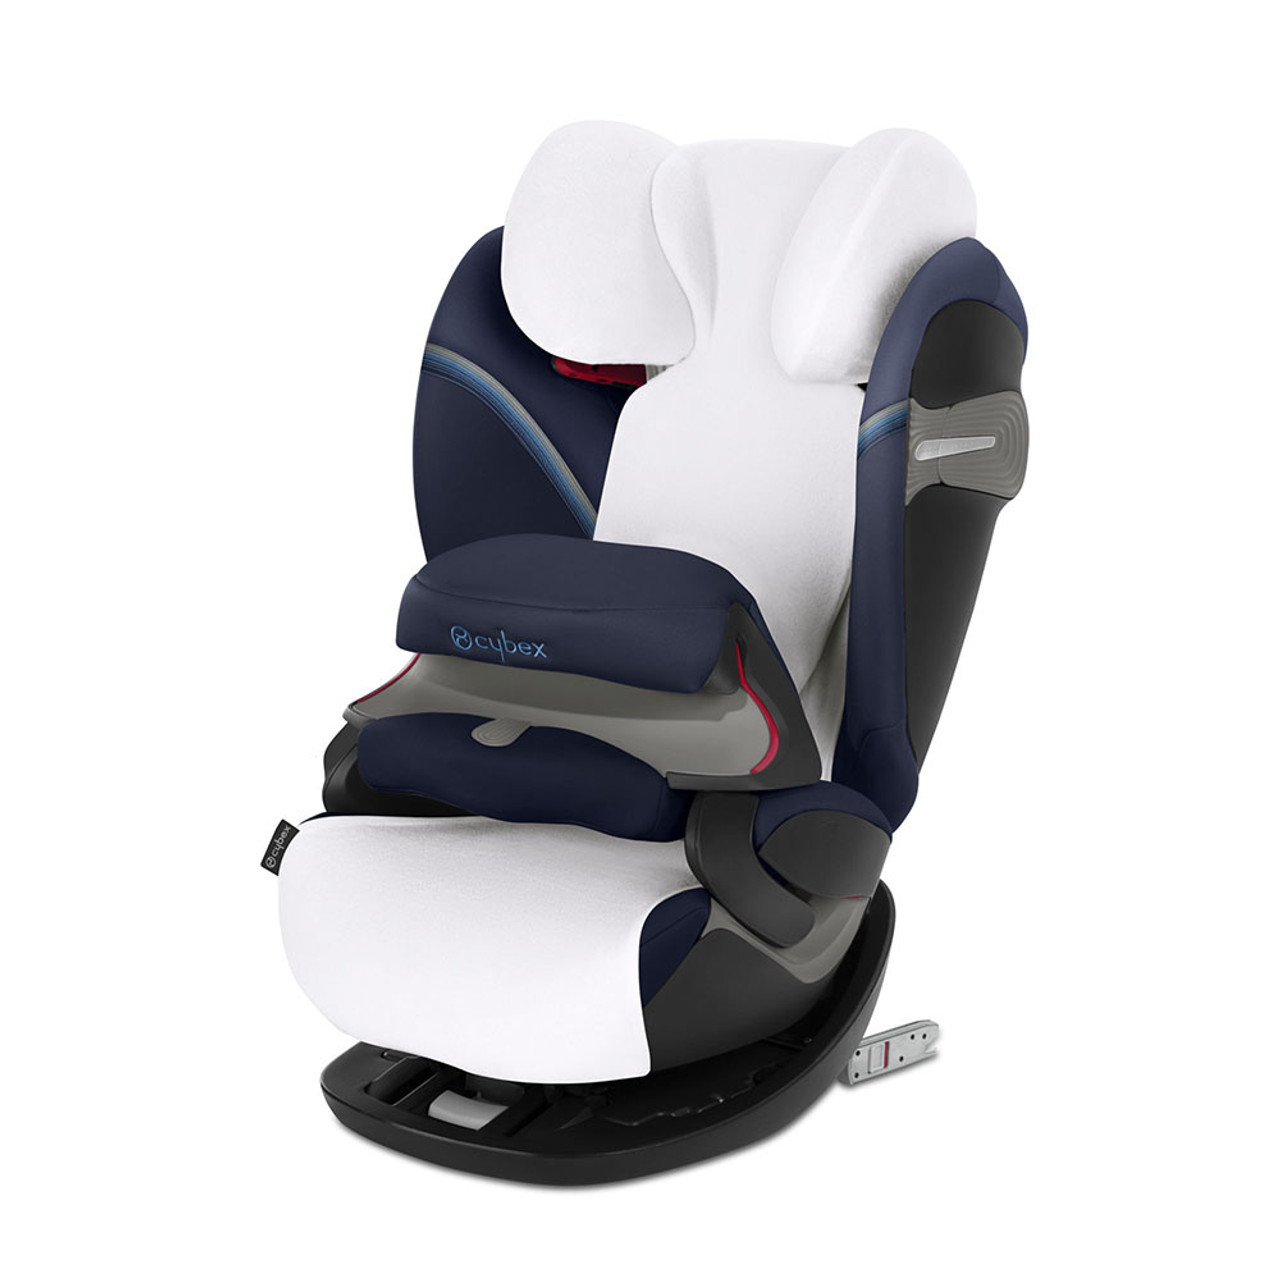 Cybex Pallas S-Fix - child seat from 9 month